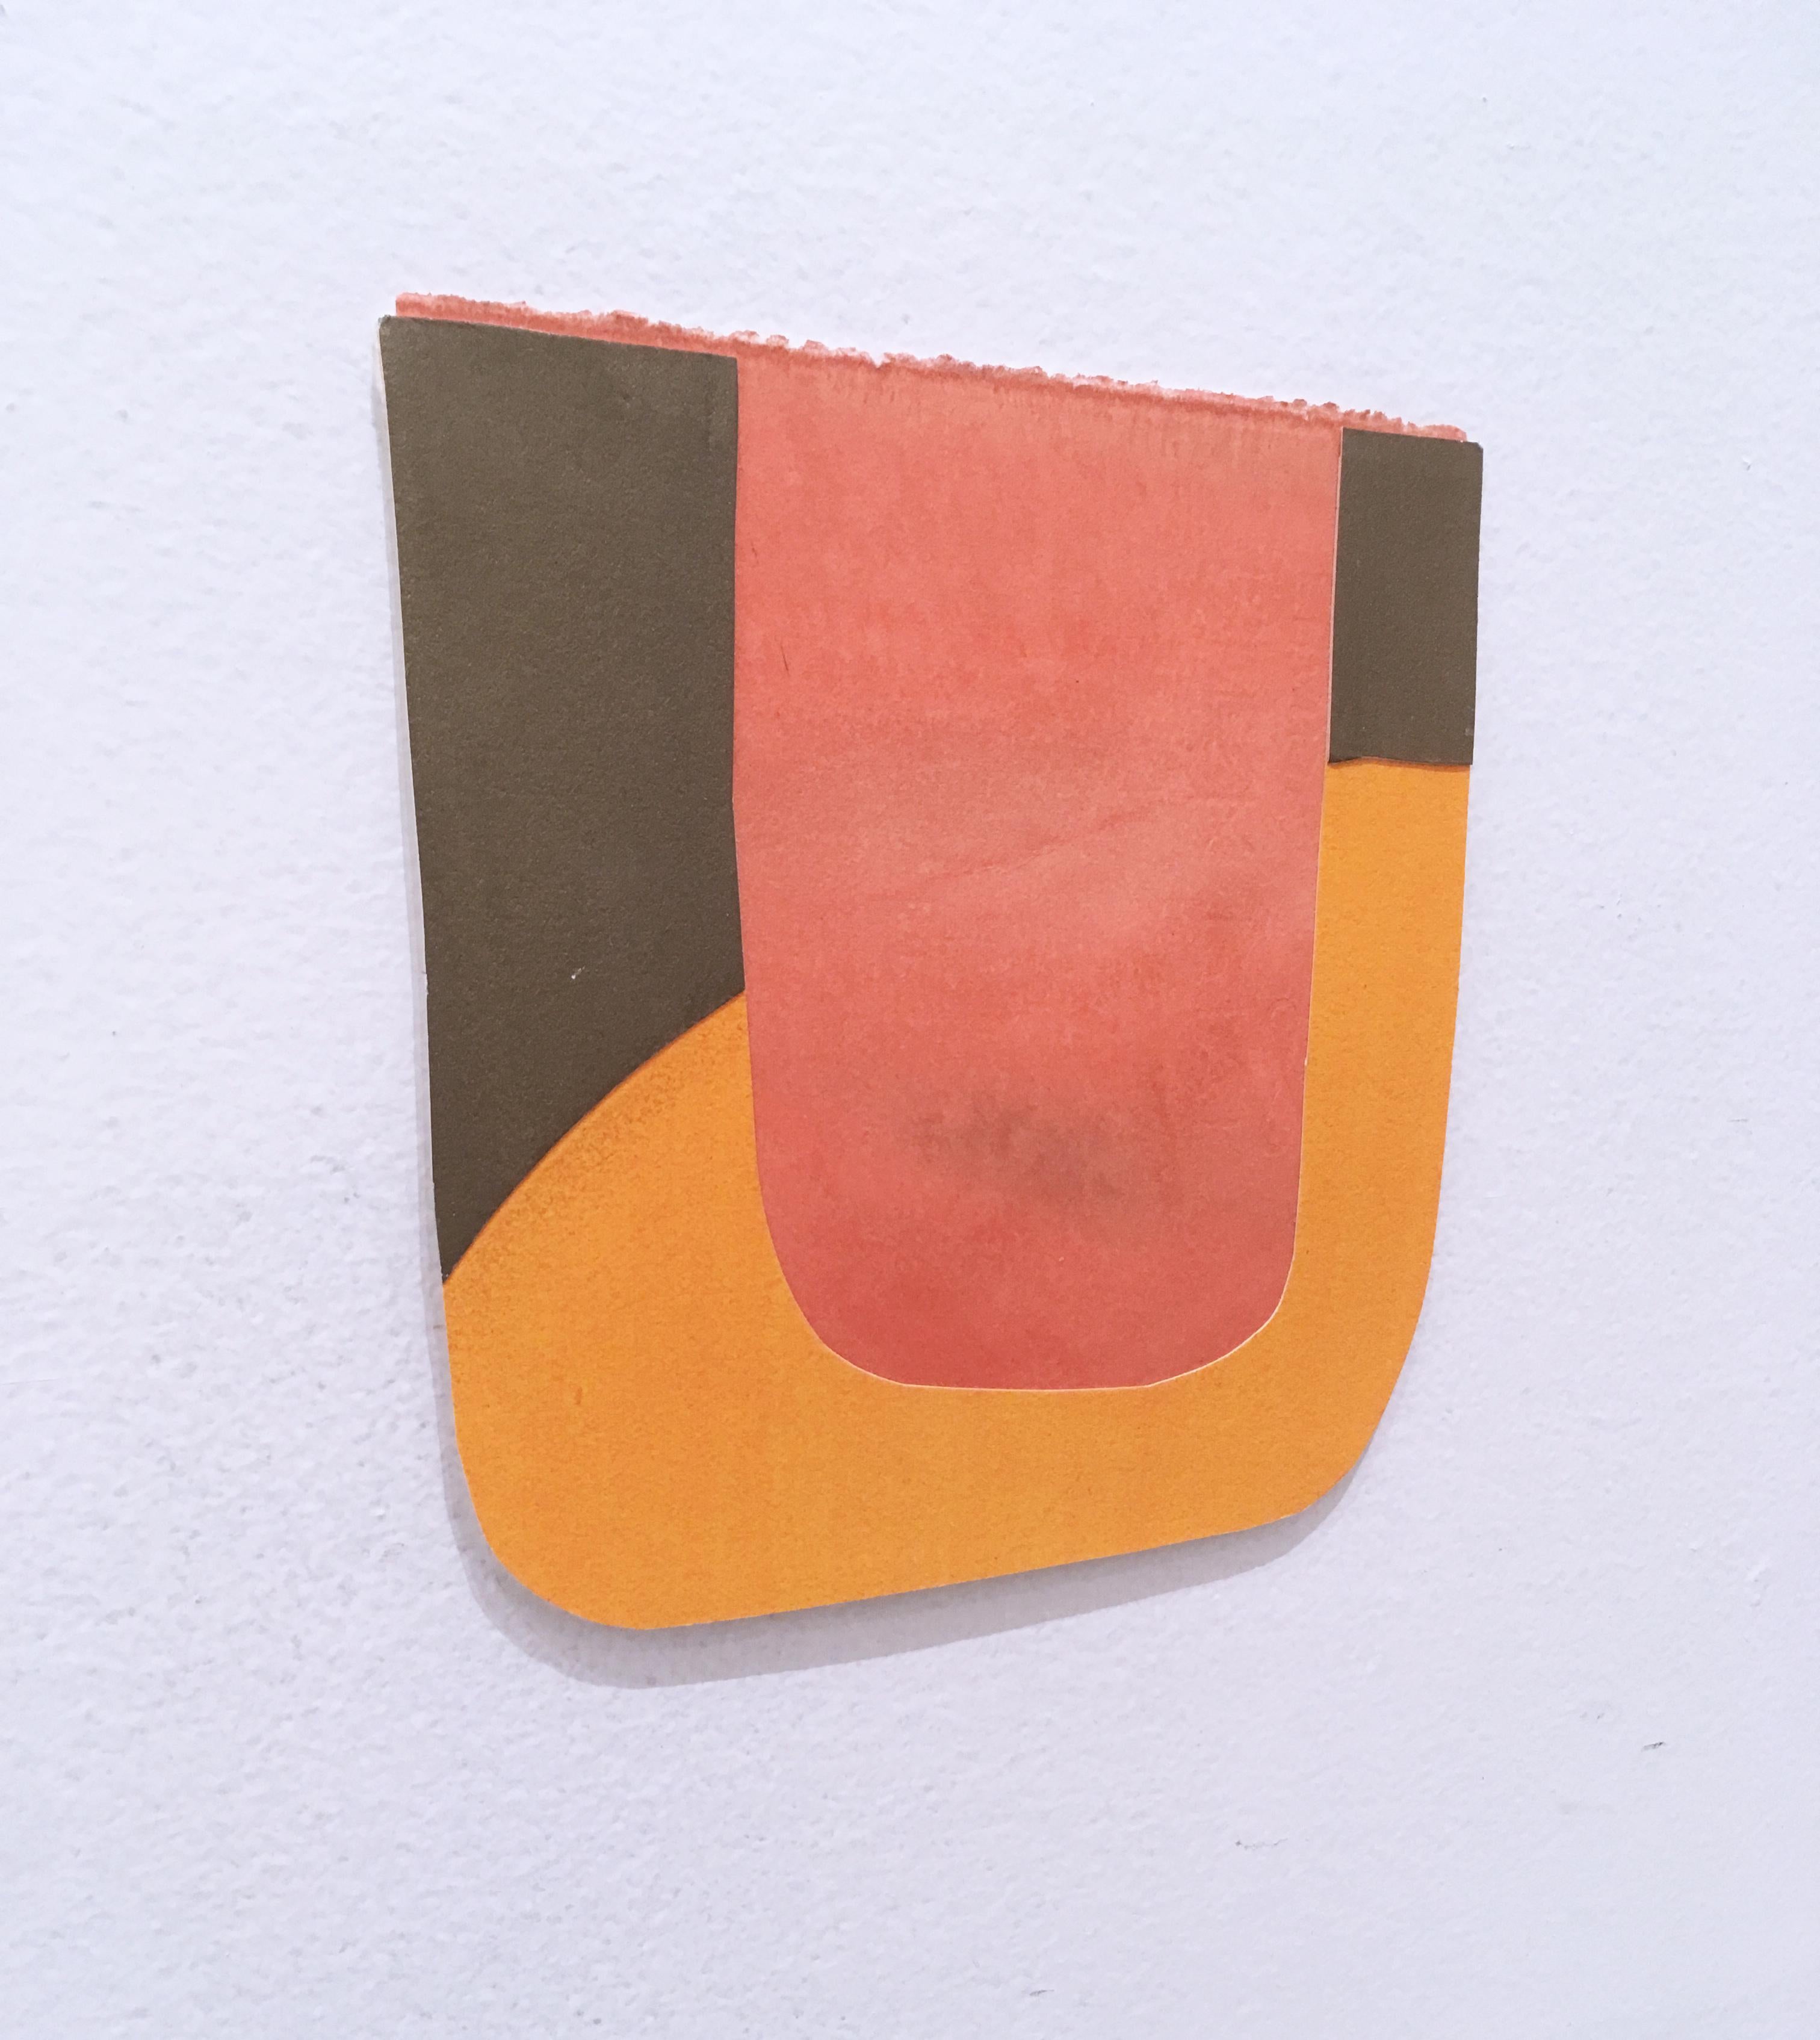 Scaled to Size 13, 2018, collage, acrylic on paper, brown, pink, orange - Contemporary Mixed Media Art by Andrew Zimmerman